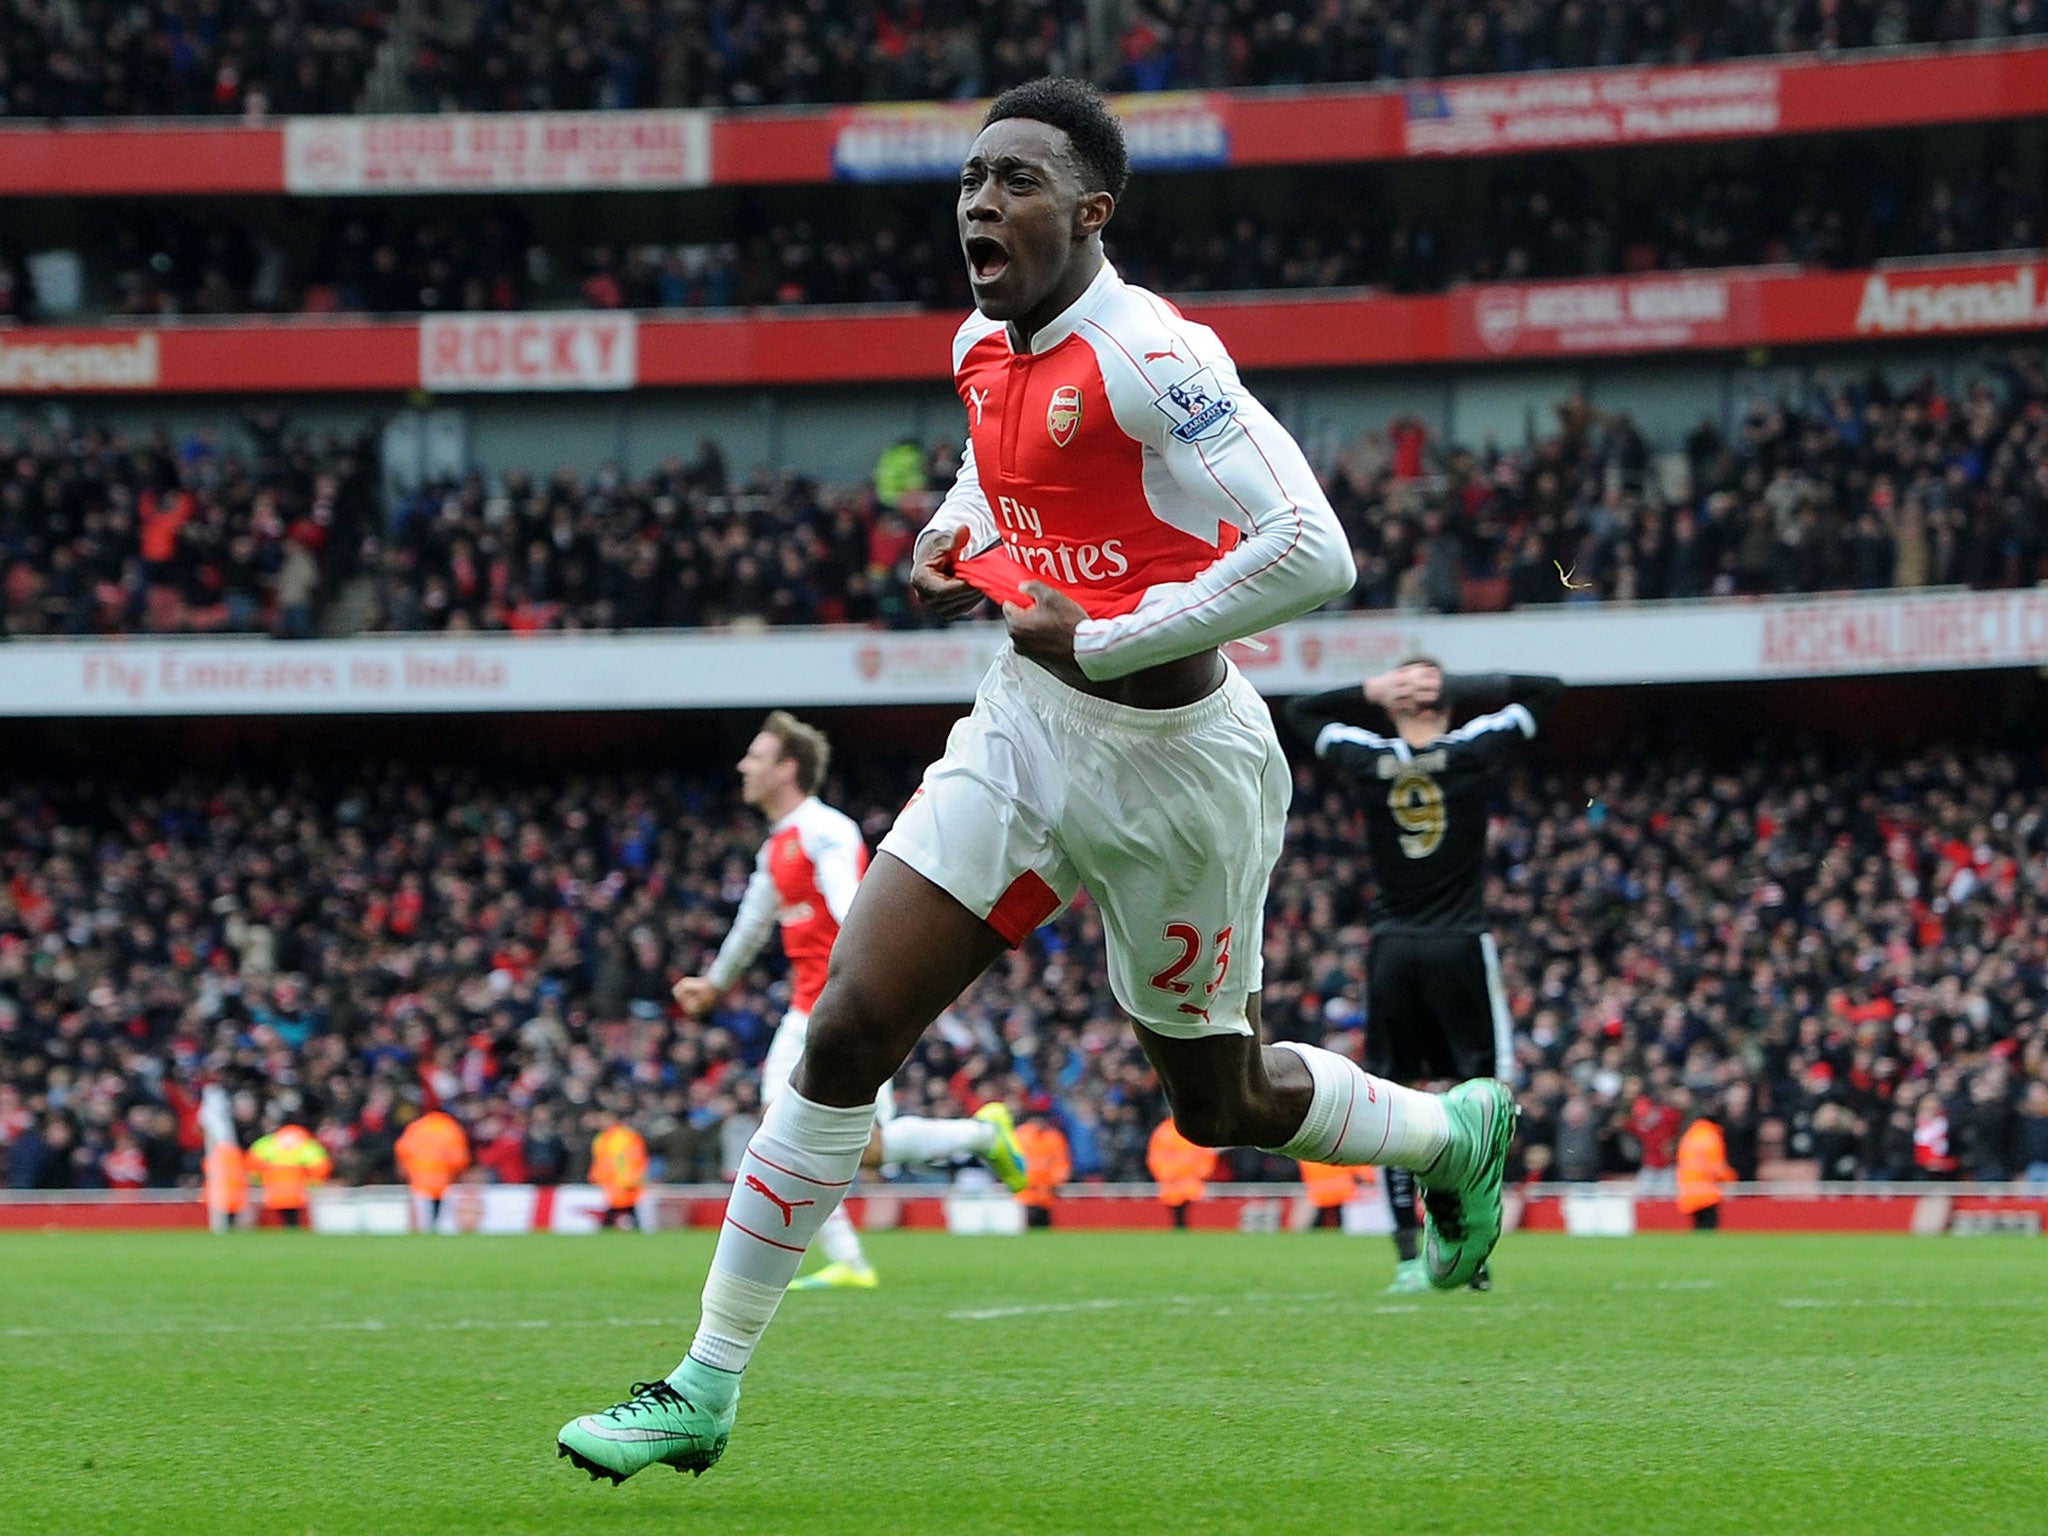 &#13;
Welbeck celebrates scoring the winning goal against Leicester&#13;